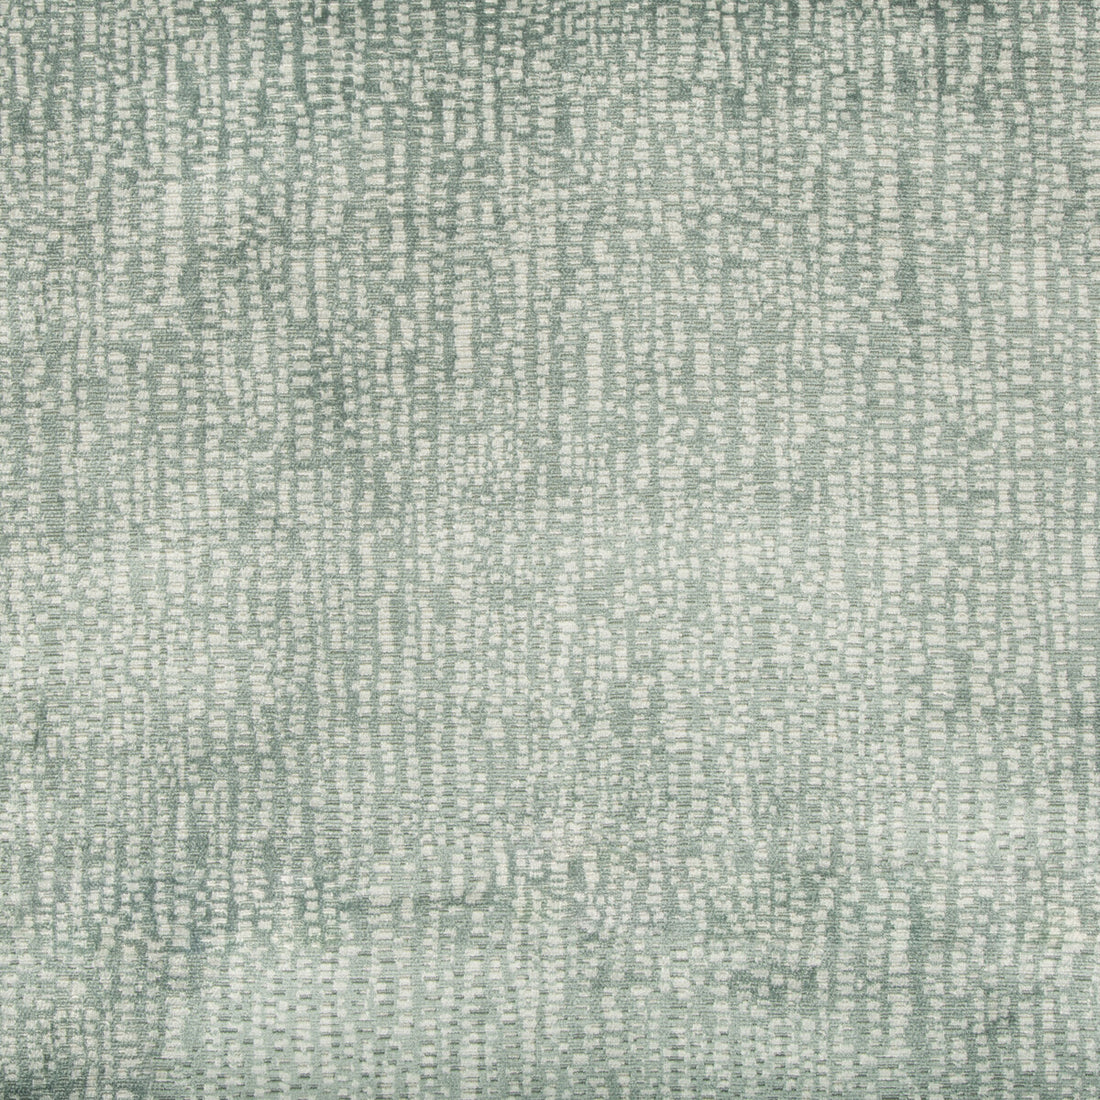 Stepping Stones fabric in mineral color - pattern 34788.35.0 - by Kravet Couture in the Artisan Velvets collection